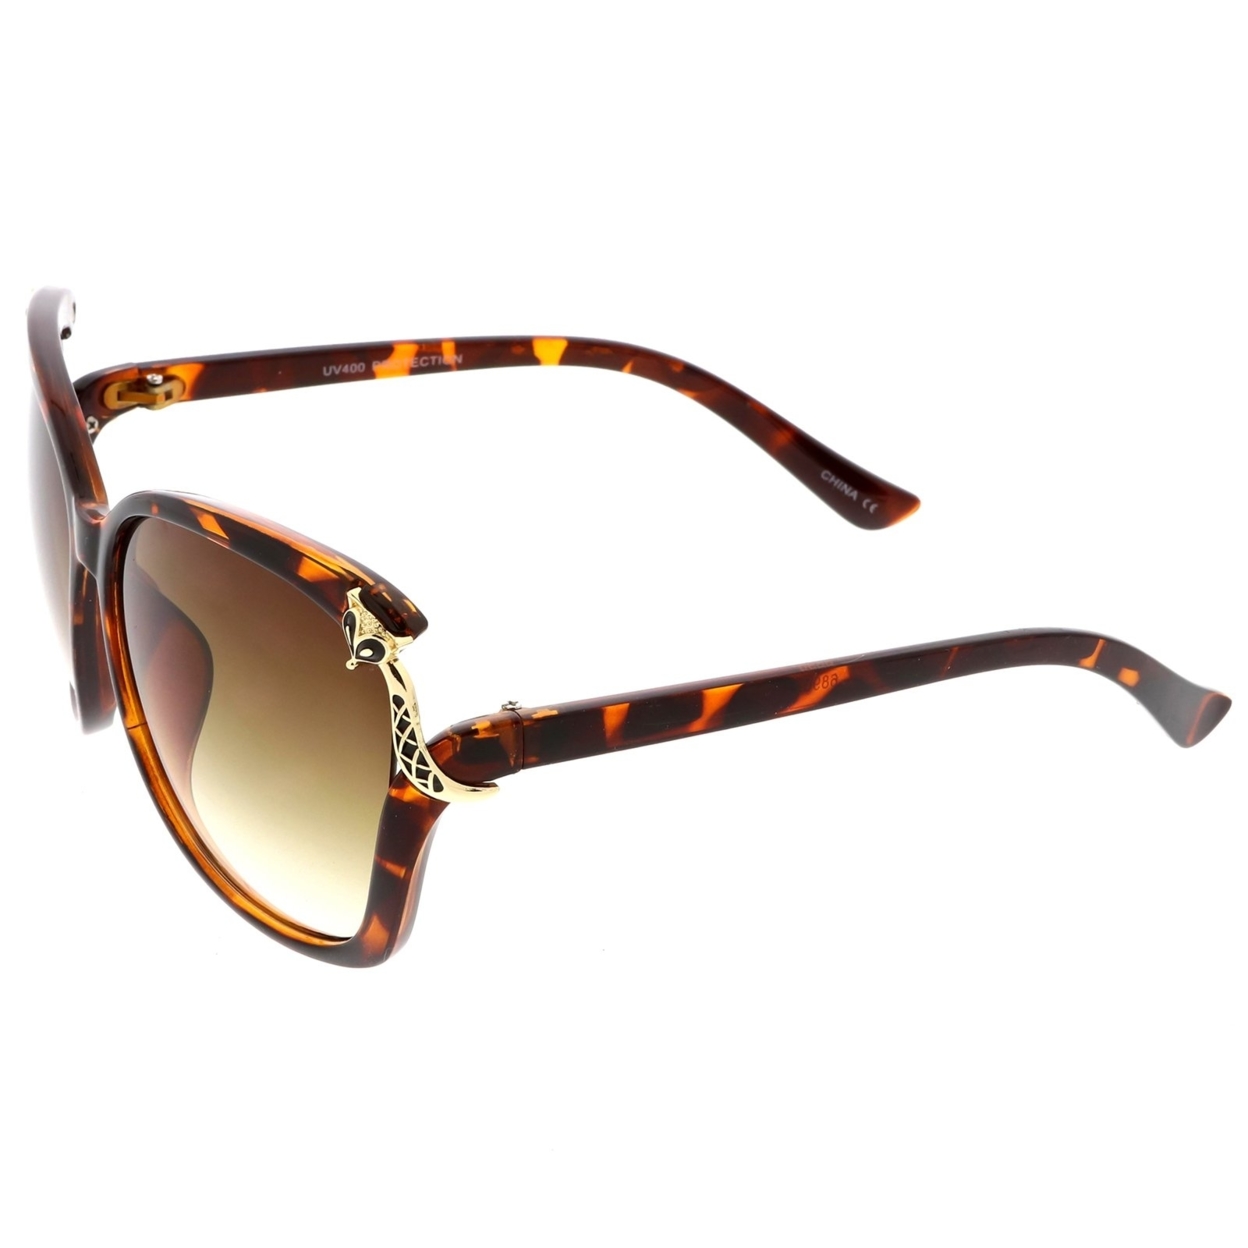 Women's Oversize Square Sunglasses With Metal Fox Accent Cutout 60mm - Tortoise Gold / Amber